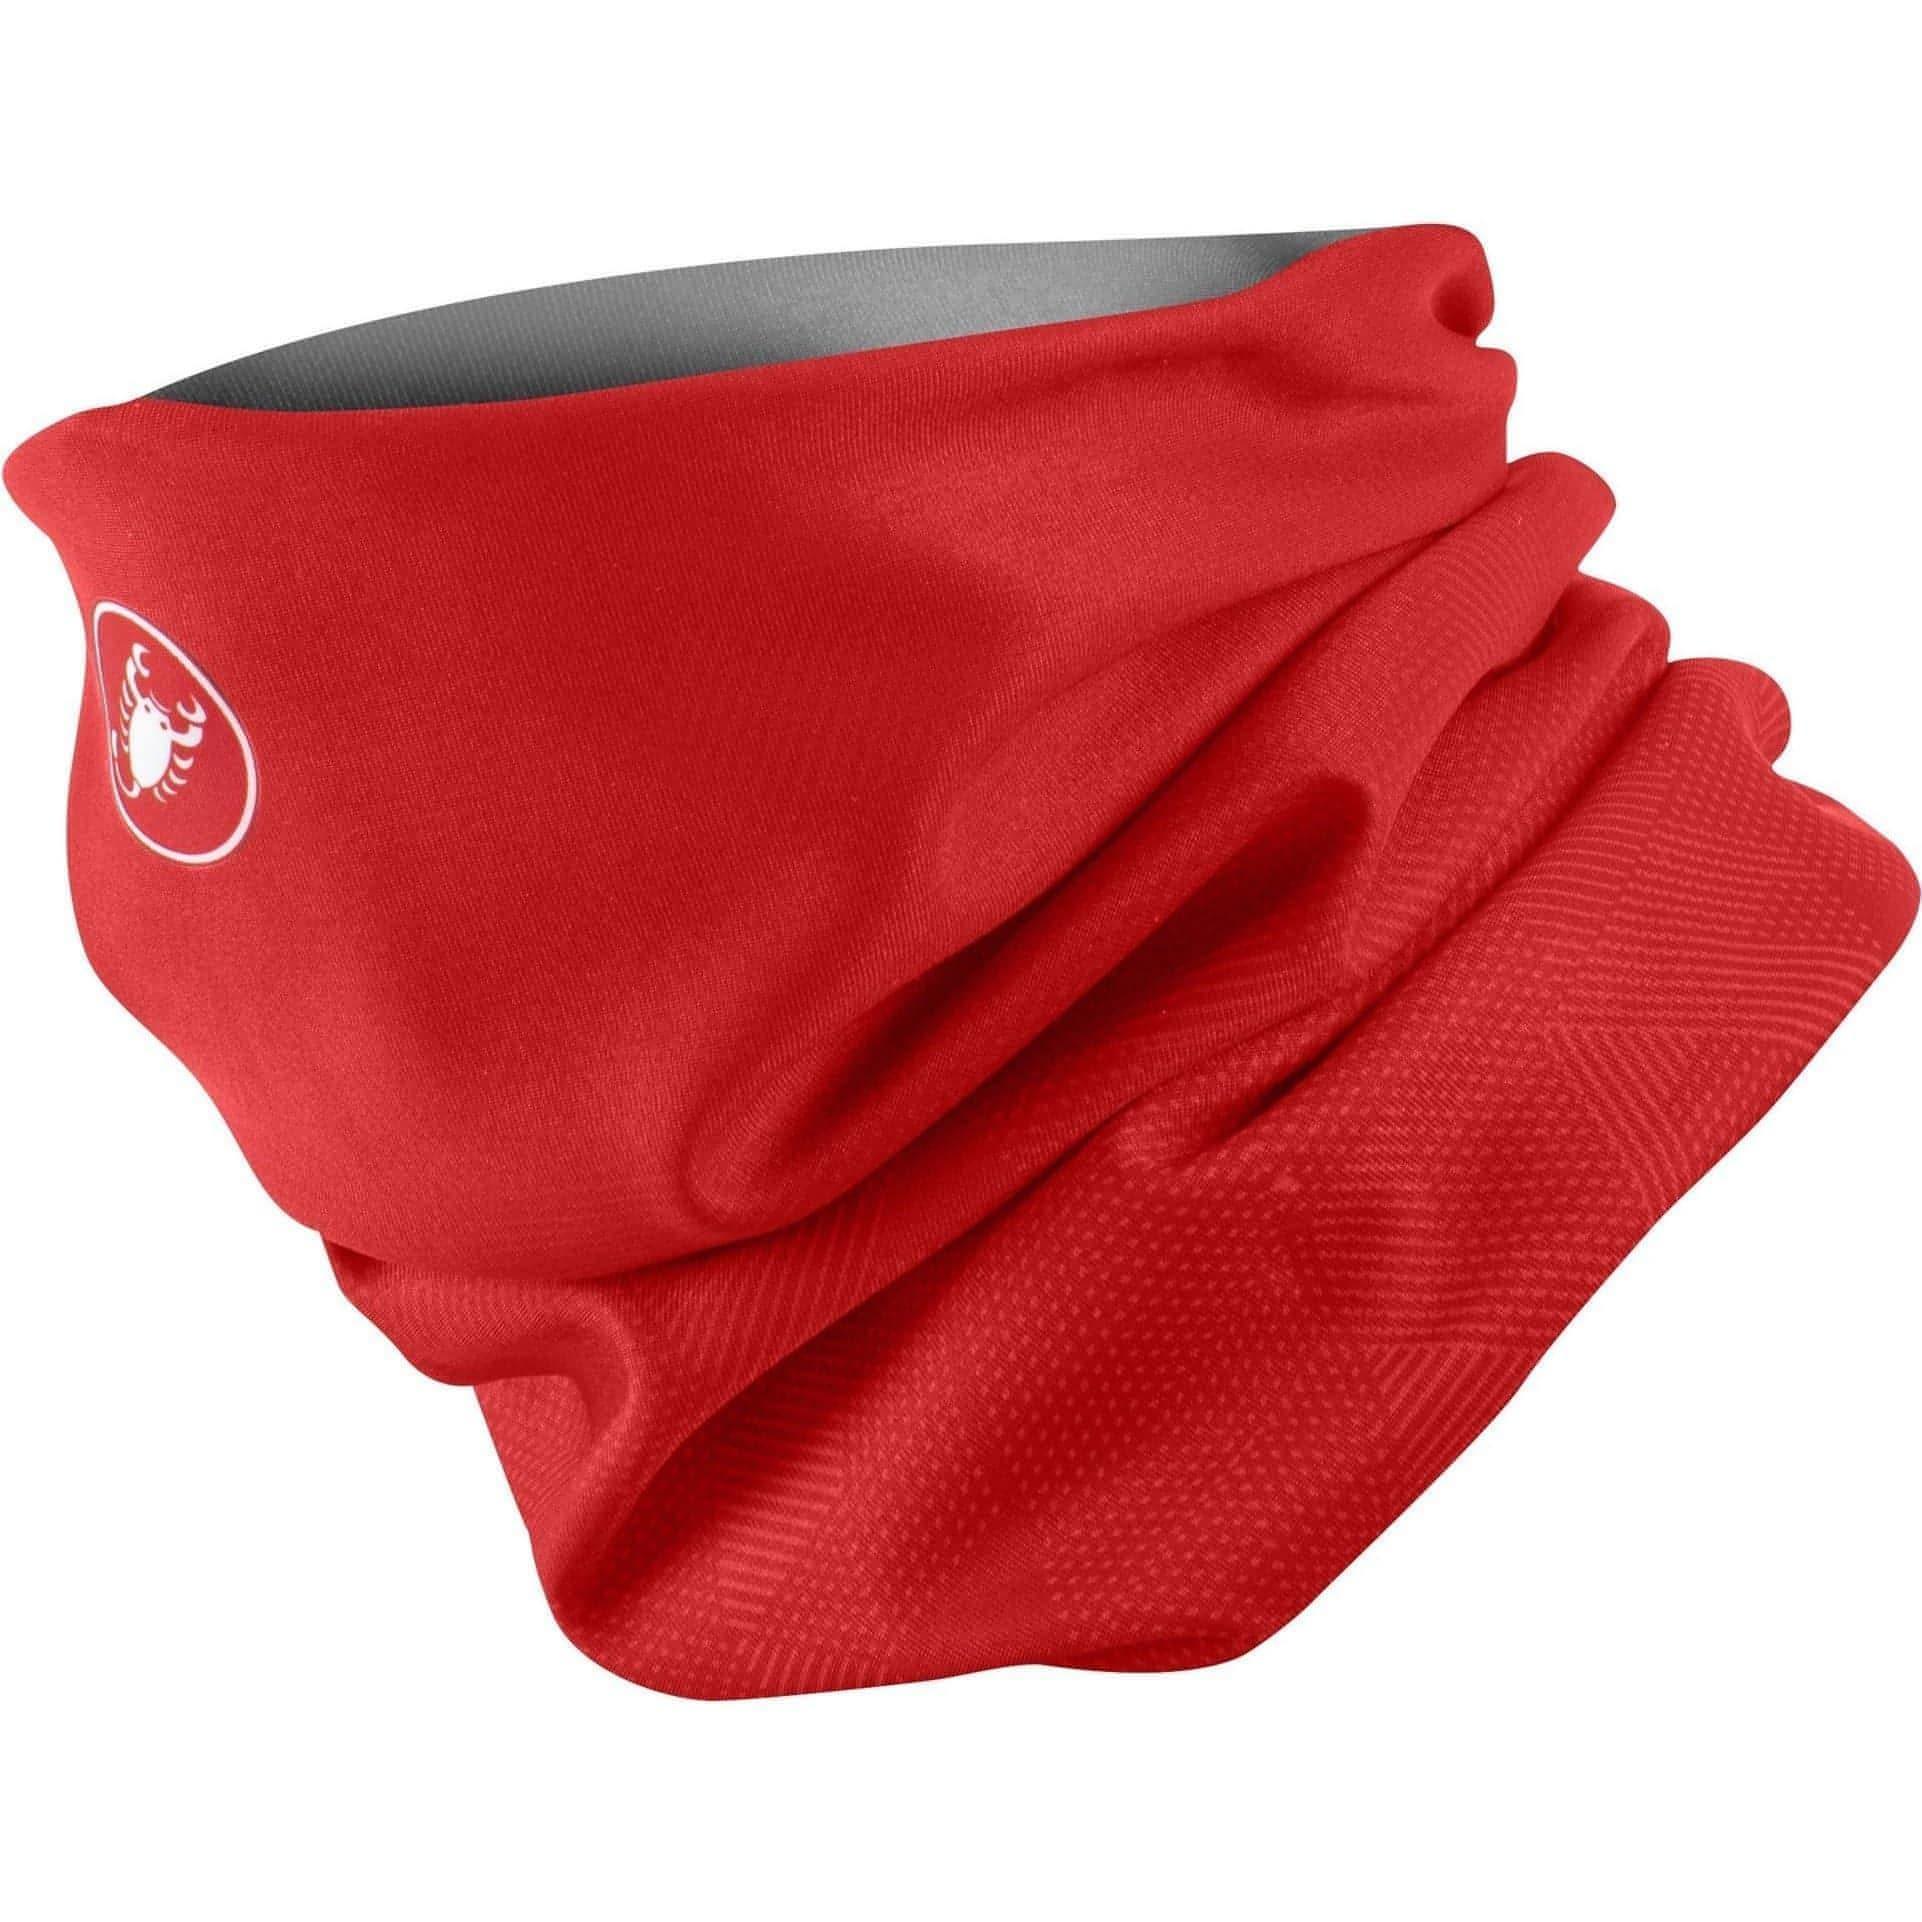 Castelli Pro Thermal Head Thingy - Red 8050949226971 - Start Fitness